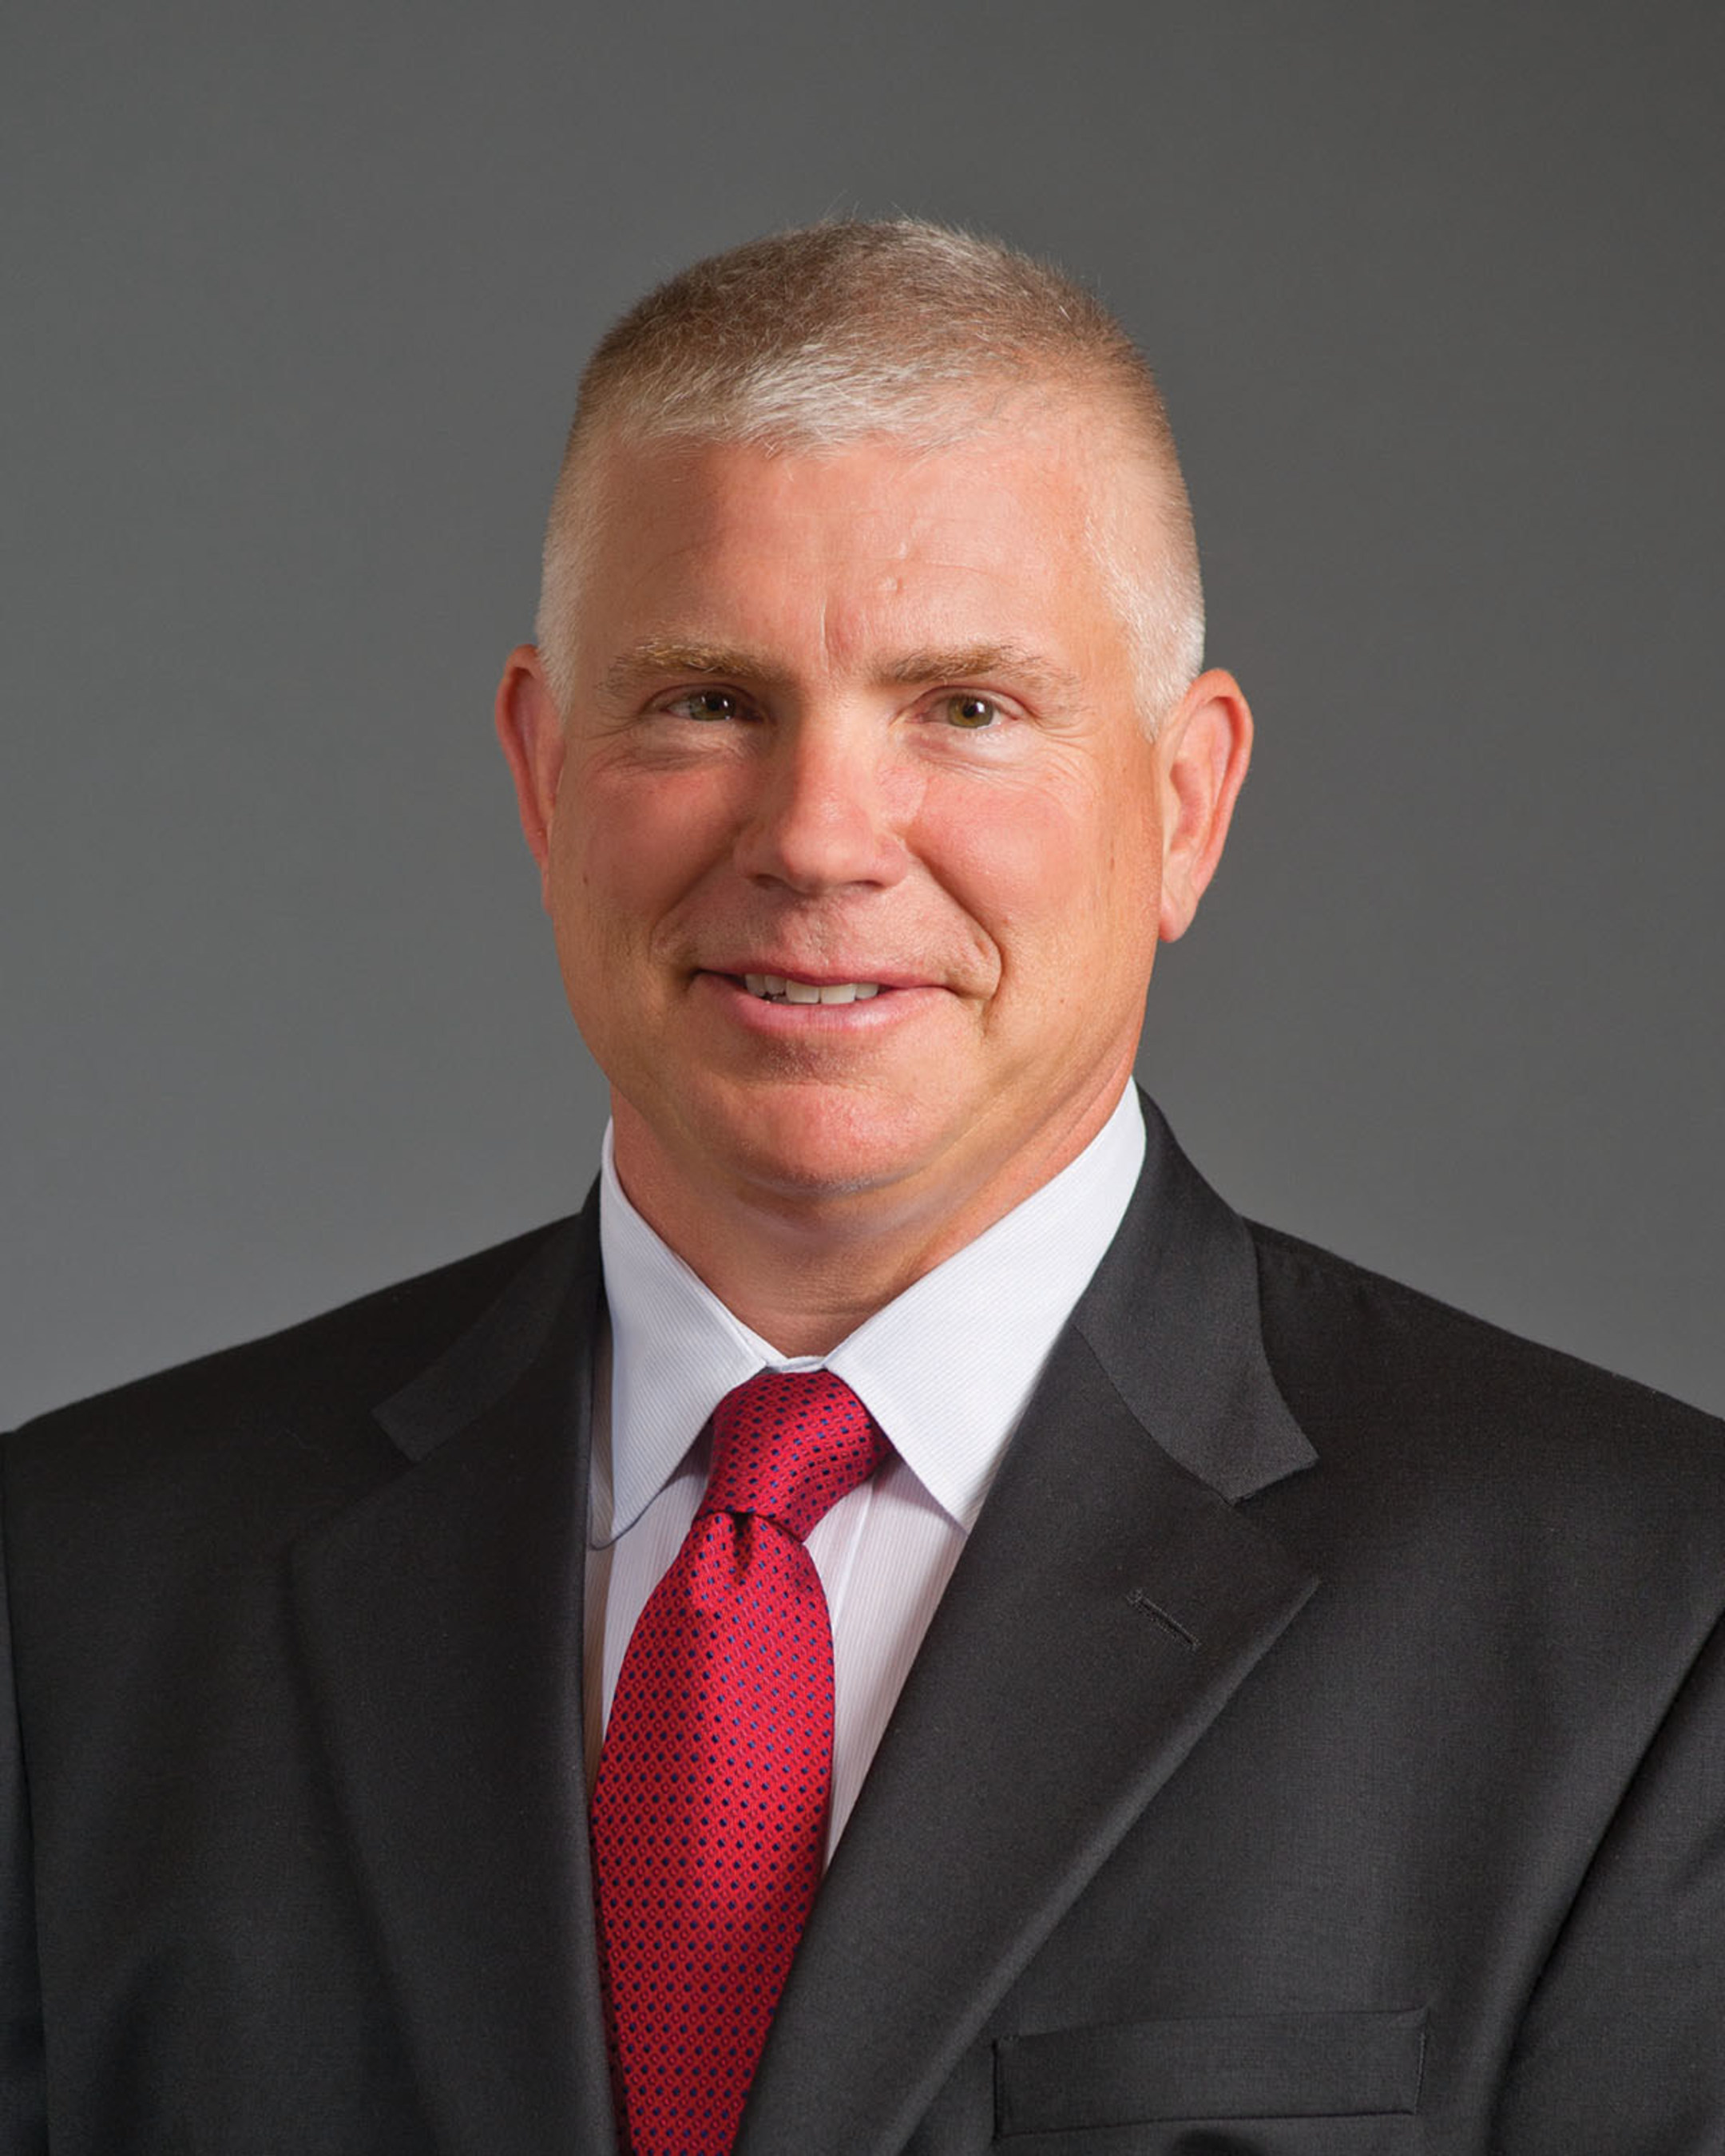 Parker Hannifin Elects Lee C. Banks as President and COO